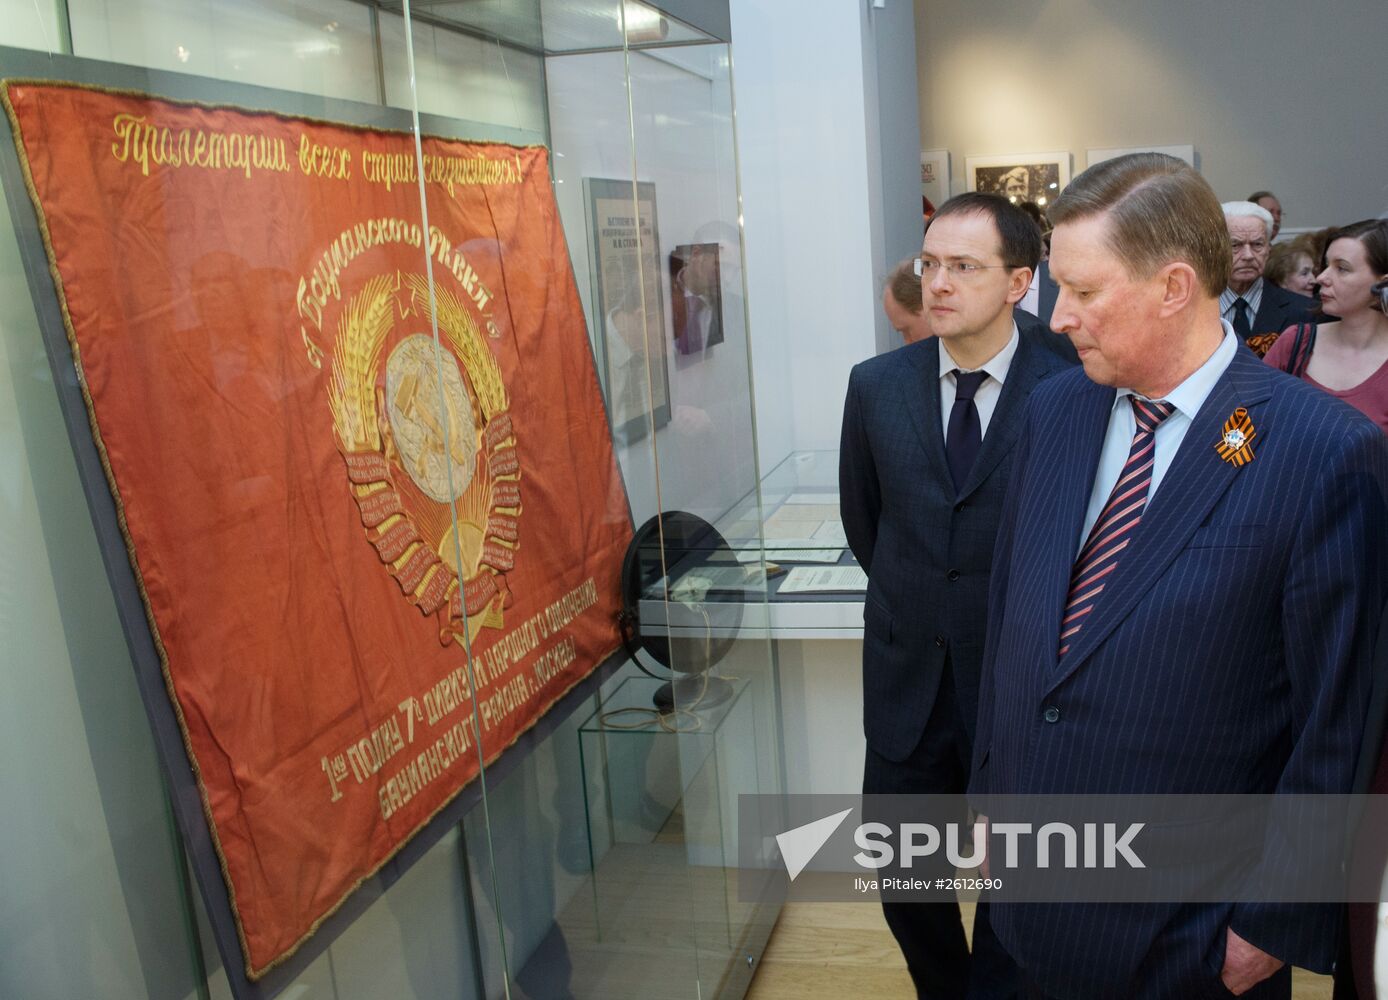 Victory Exhibition opens in Historical Museum